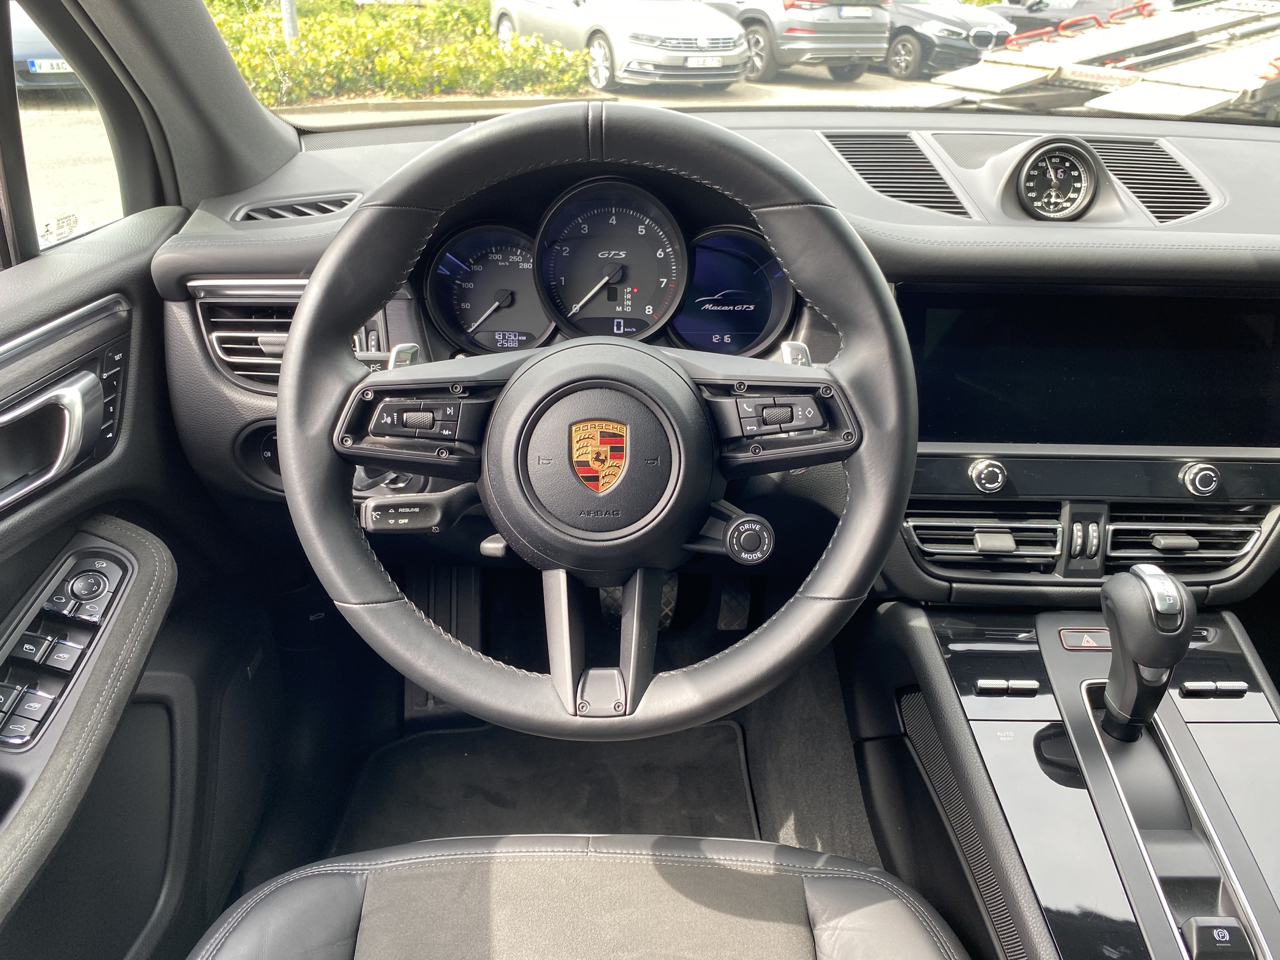 youngtimer.one - Porsche Macan GTS - Dolomite Silver - 2022 - 18 of 43